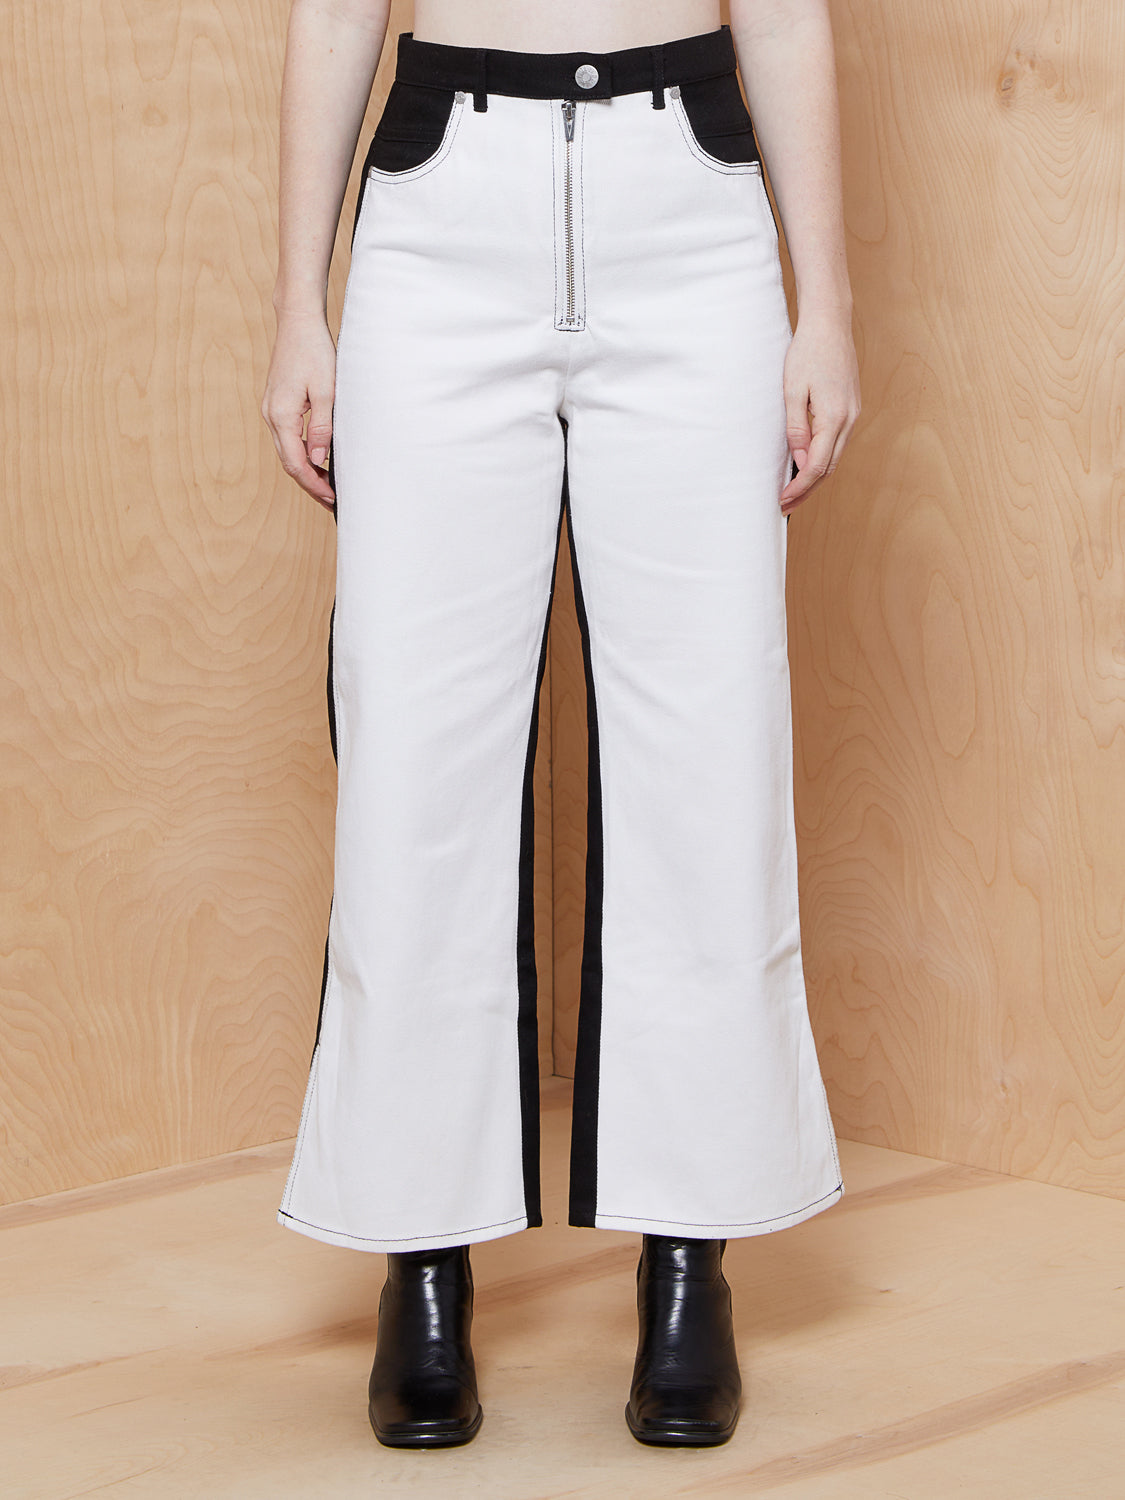 VEDA White and Black Wide Leg Pants